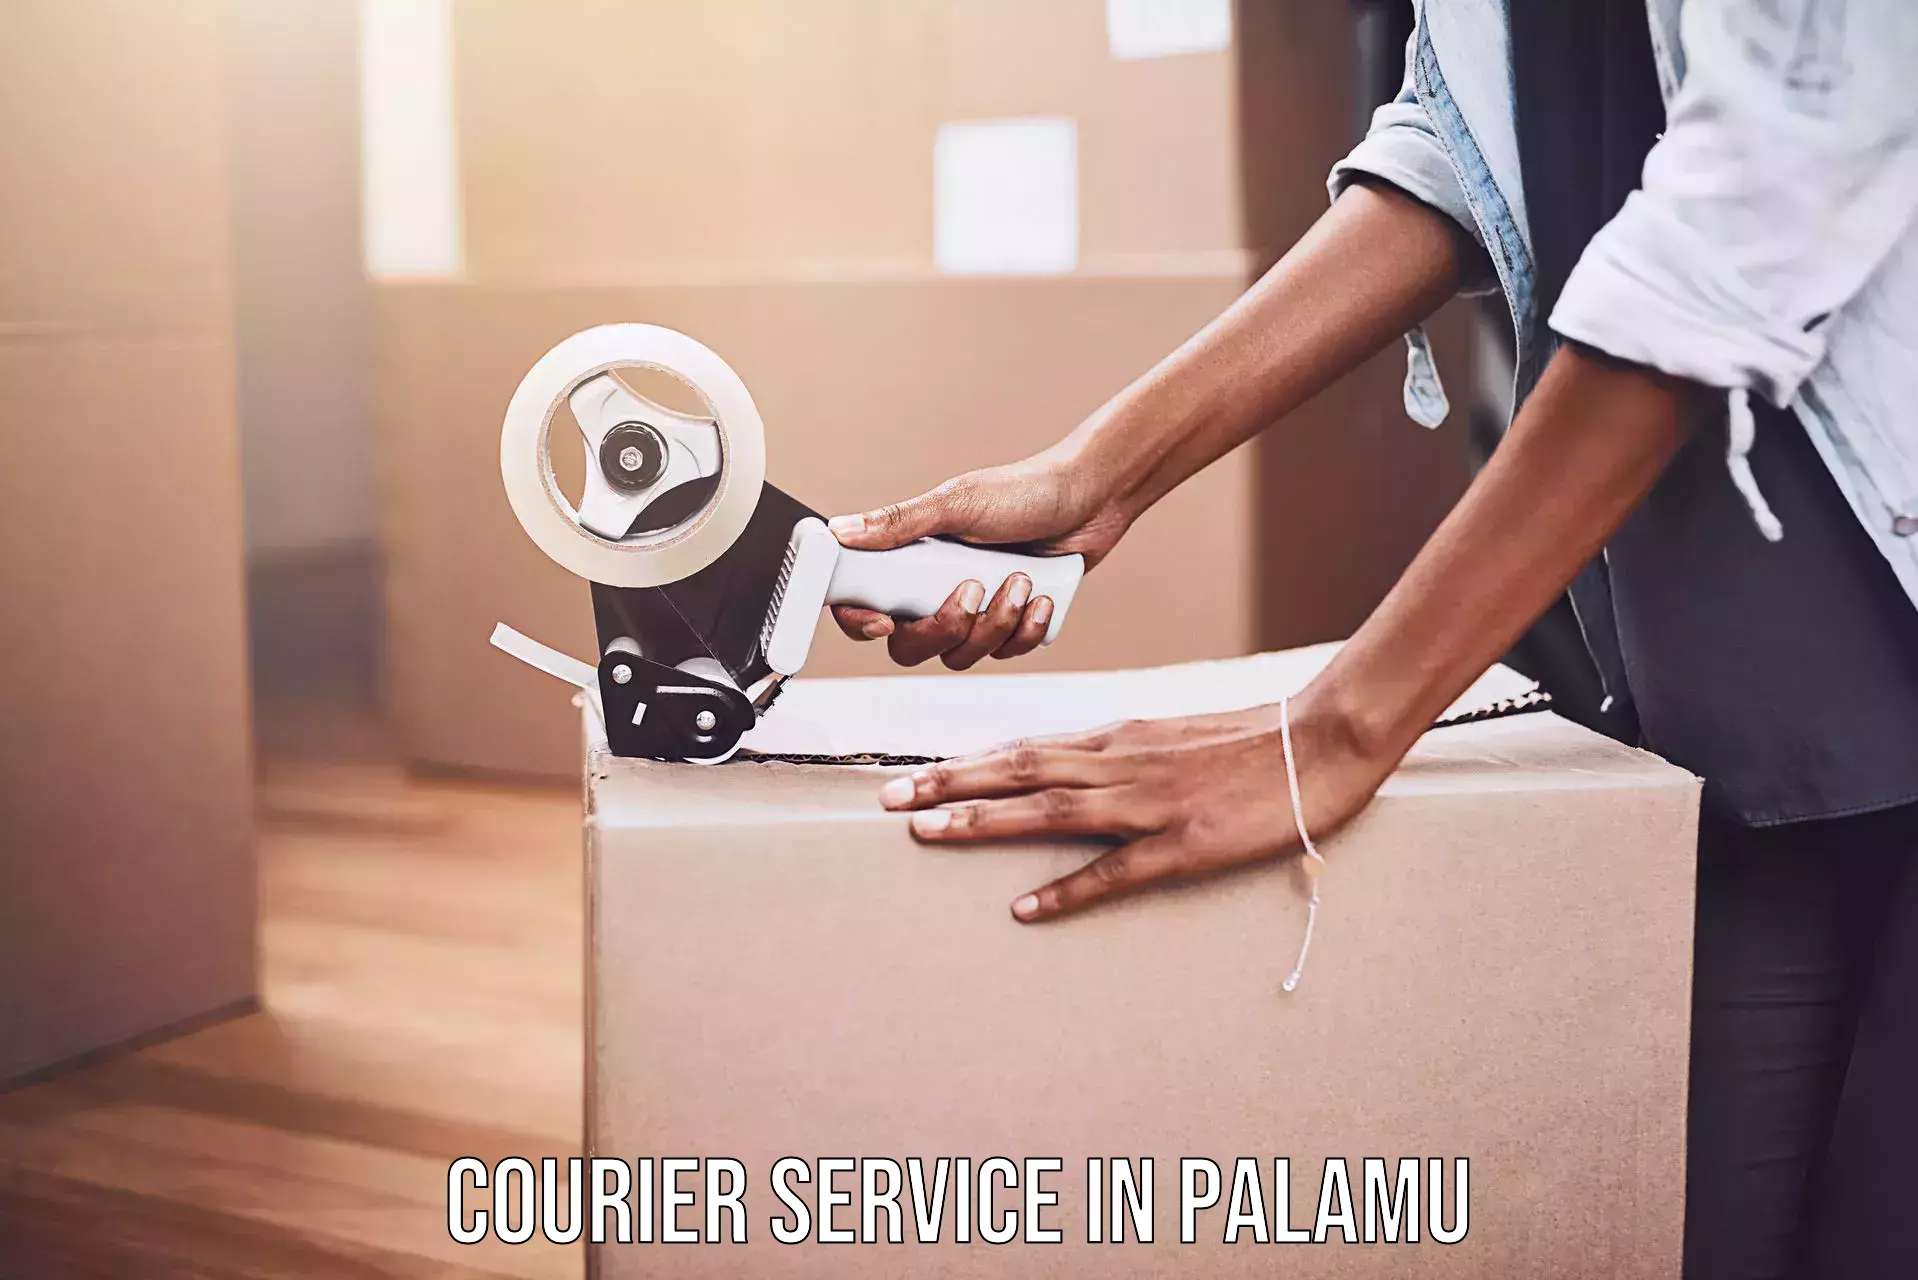 International courier rates in Palamu